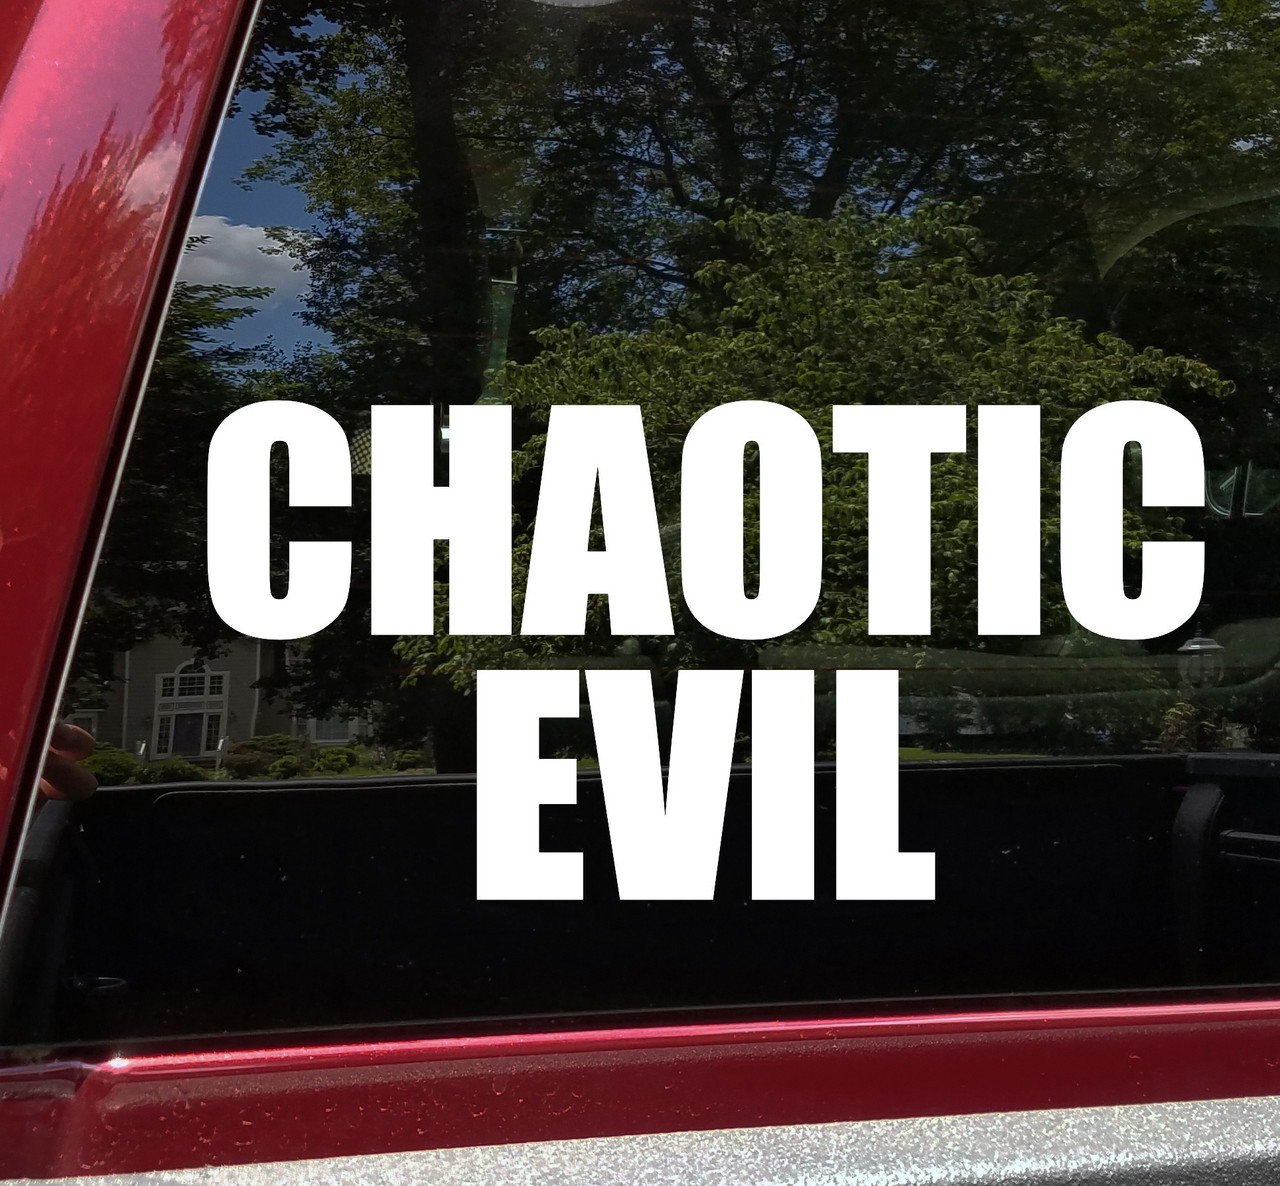 Chaotic Evil Vinyl Sticker - RPG Role Playing Character Alignment V2 - Die Cut Decal